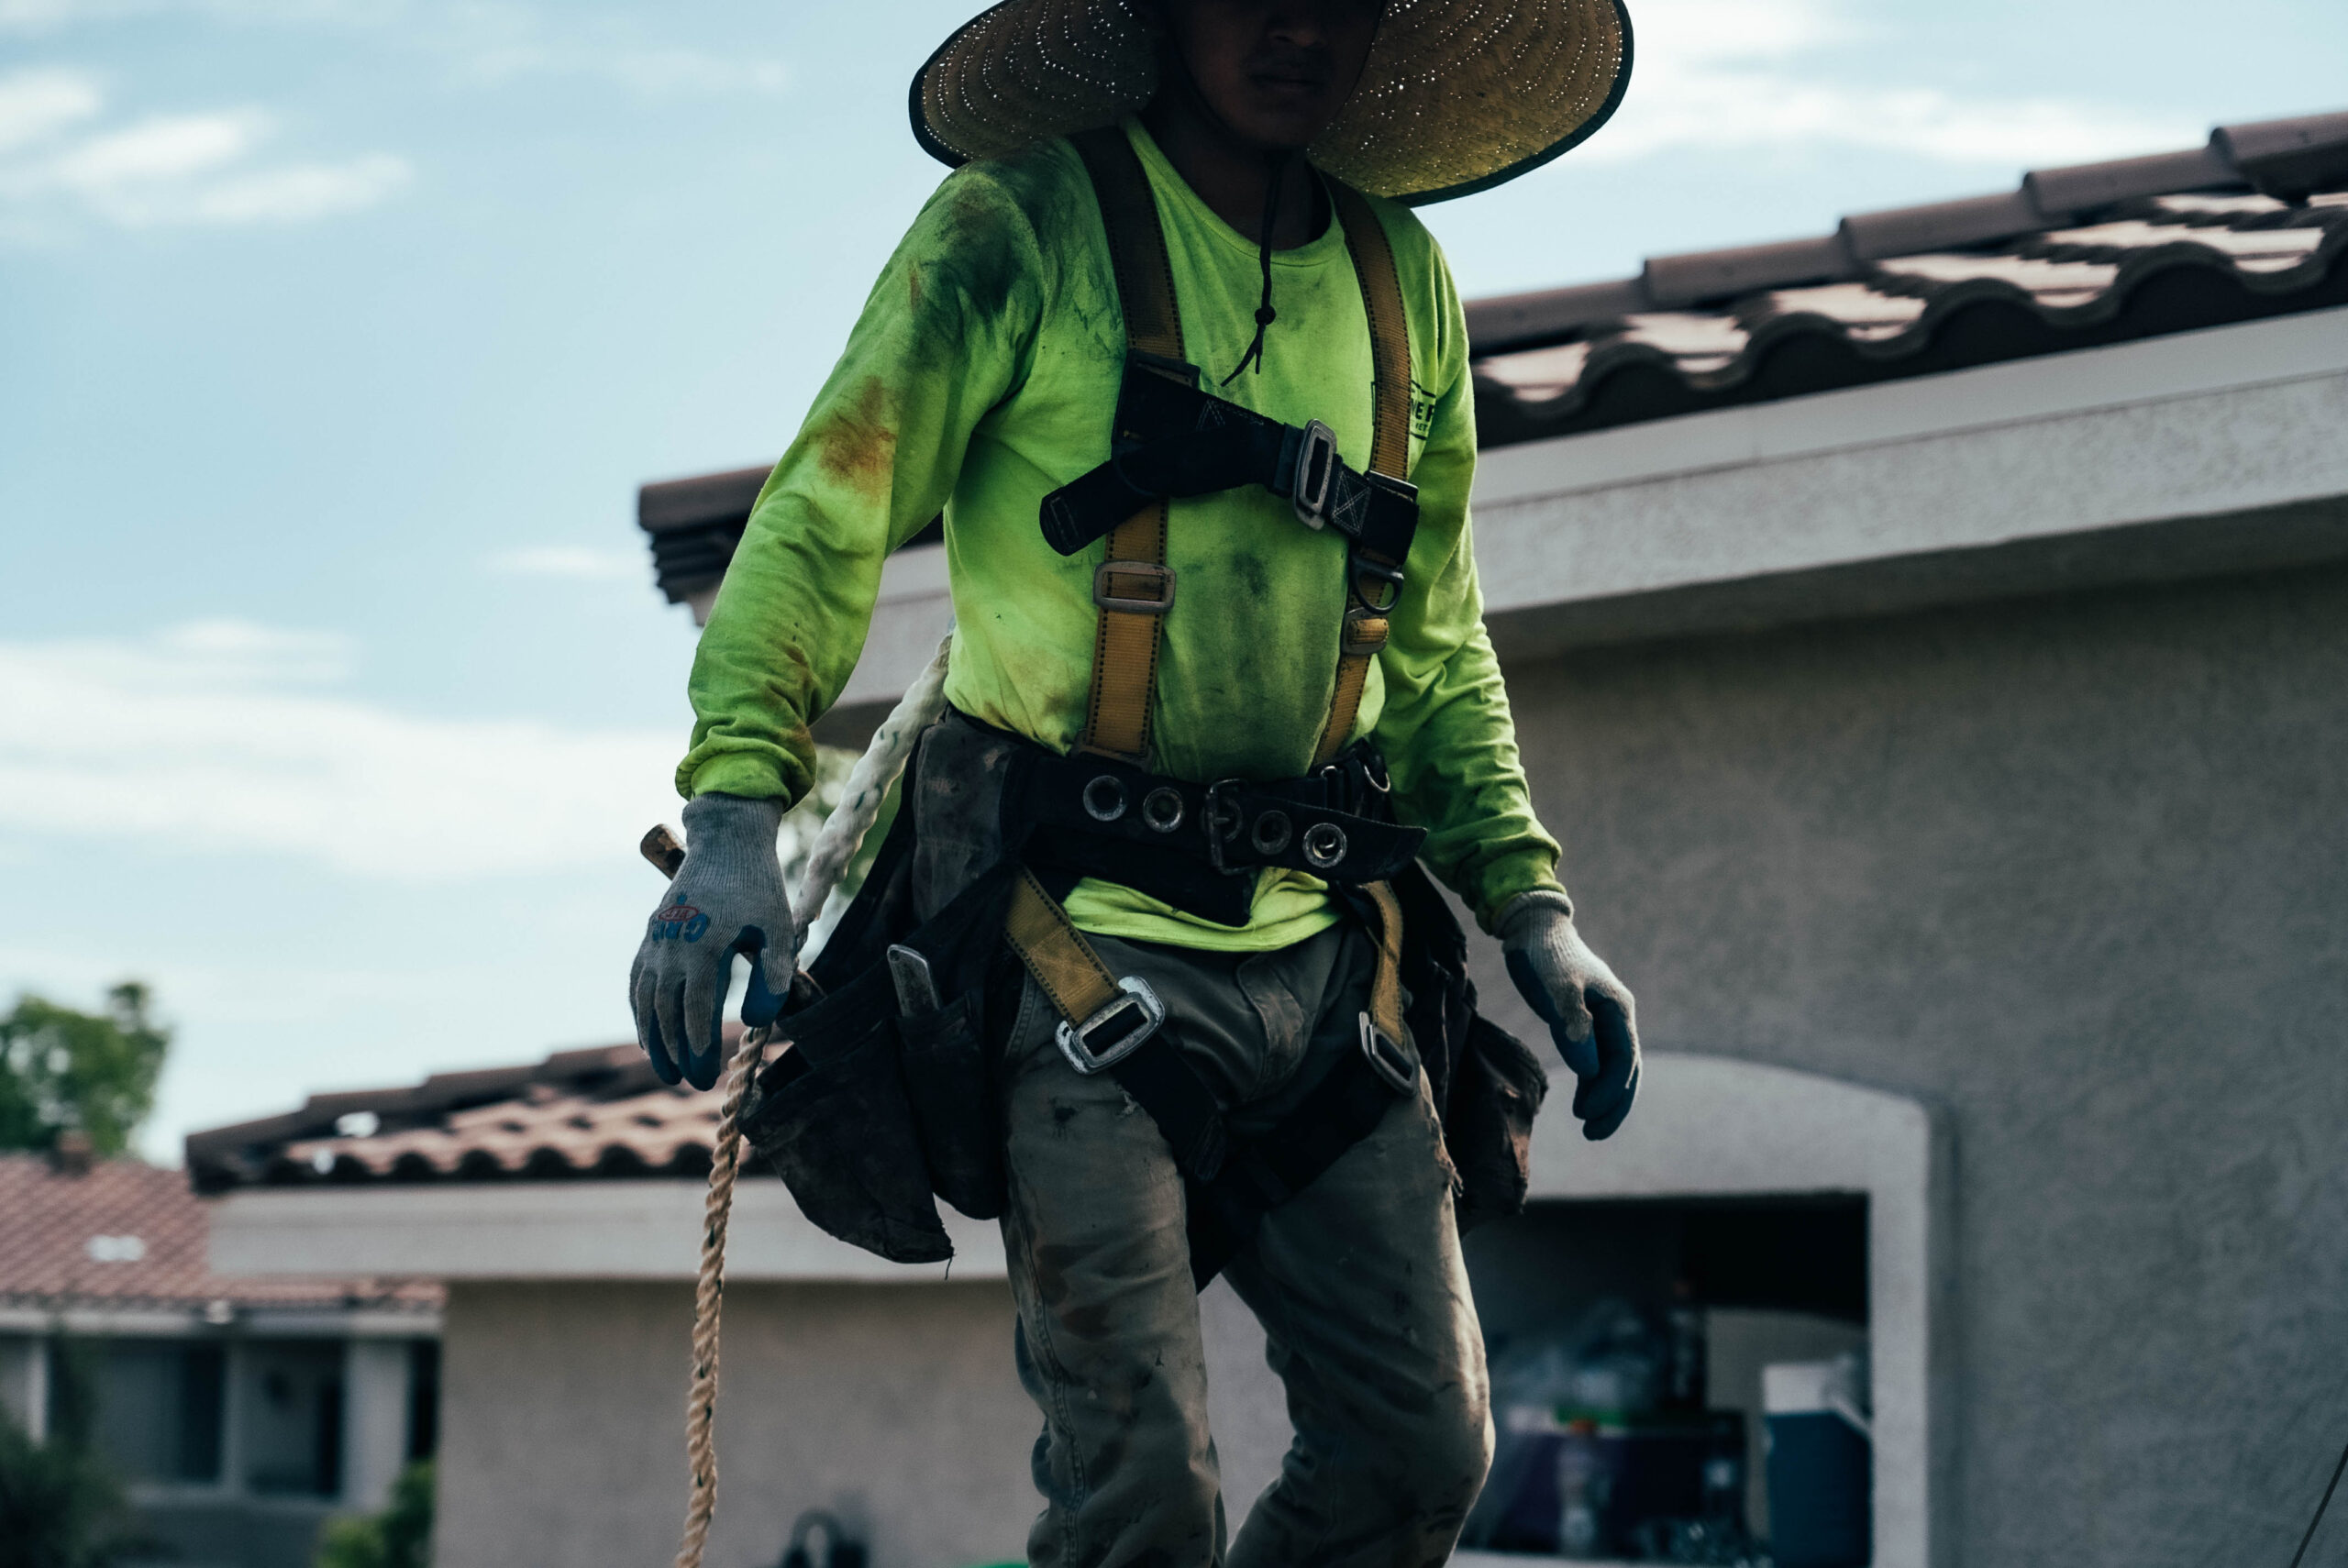 A Behmer employee on roof during tile roofing repair, a service done by Behmer in Grayhawk.